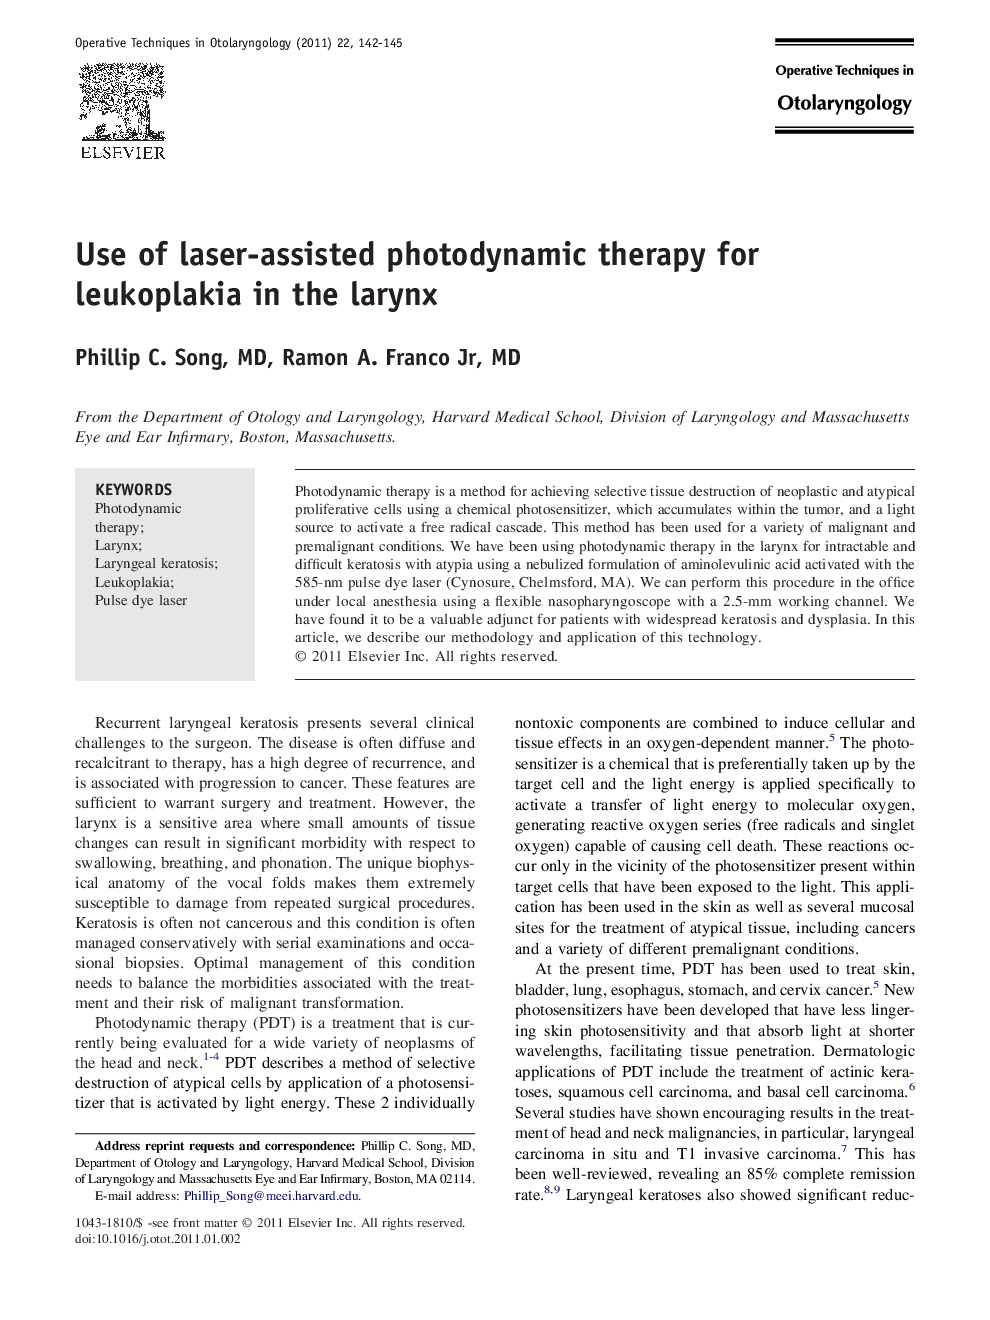 Use of laser-assisted photodynamic therapy for leukoplakia in the larynx